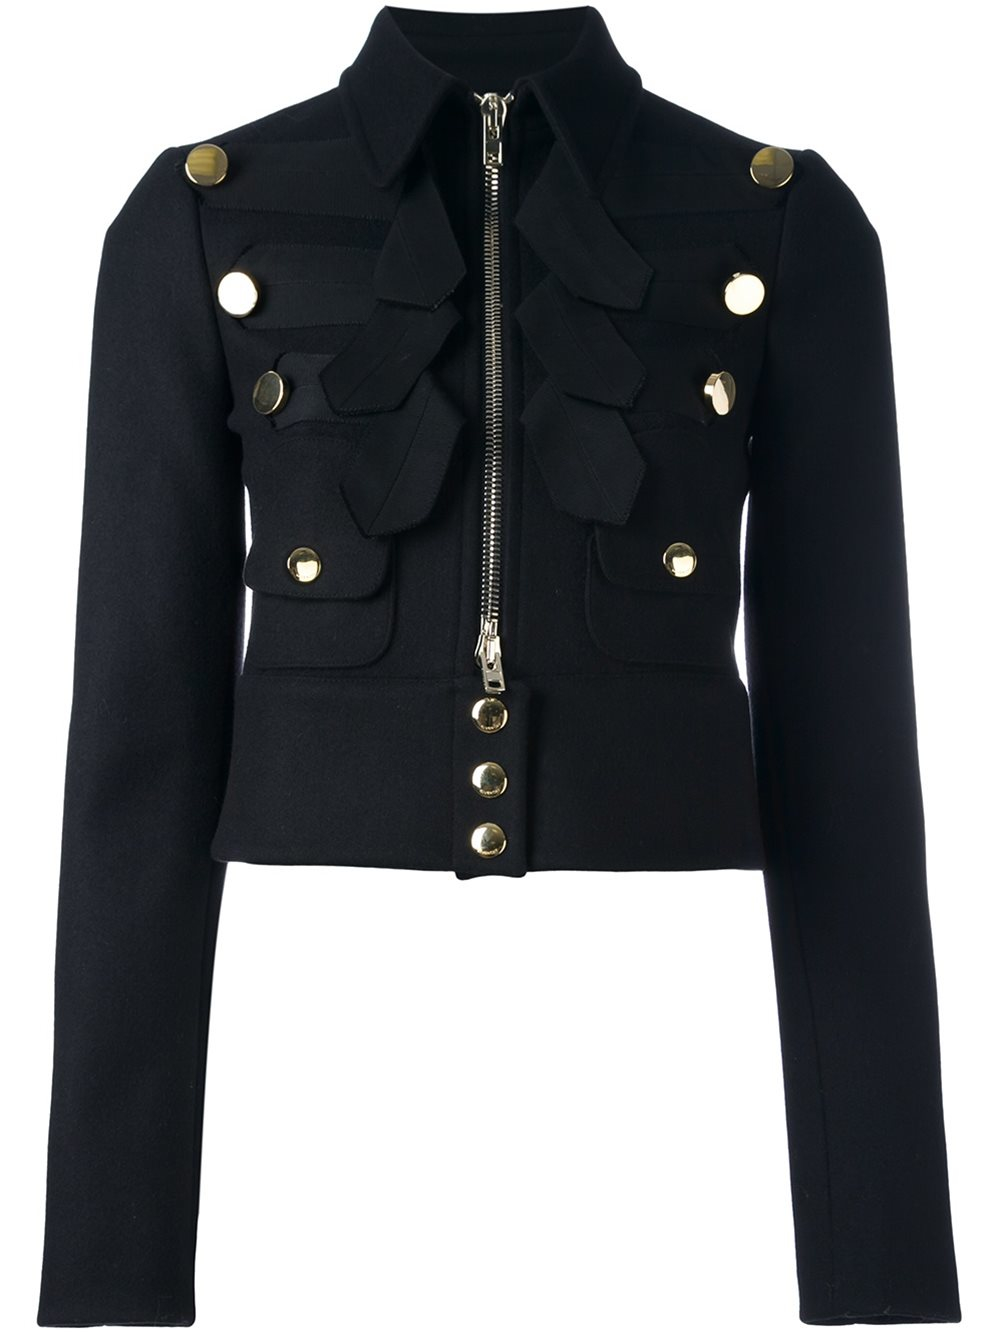 Givenchy Cropped Military Jacket in Black | Lyst